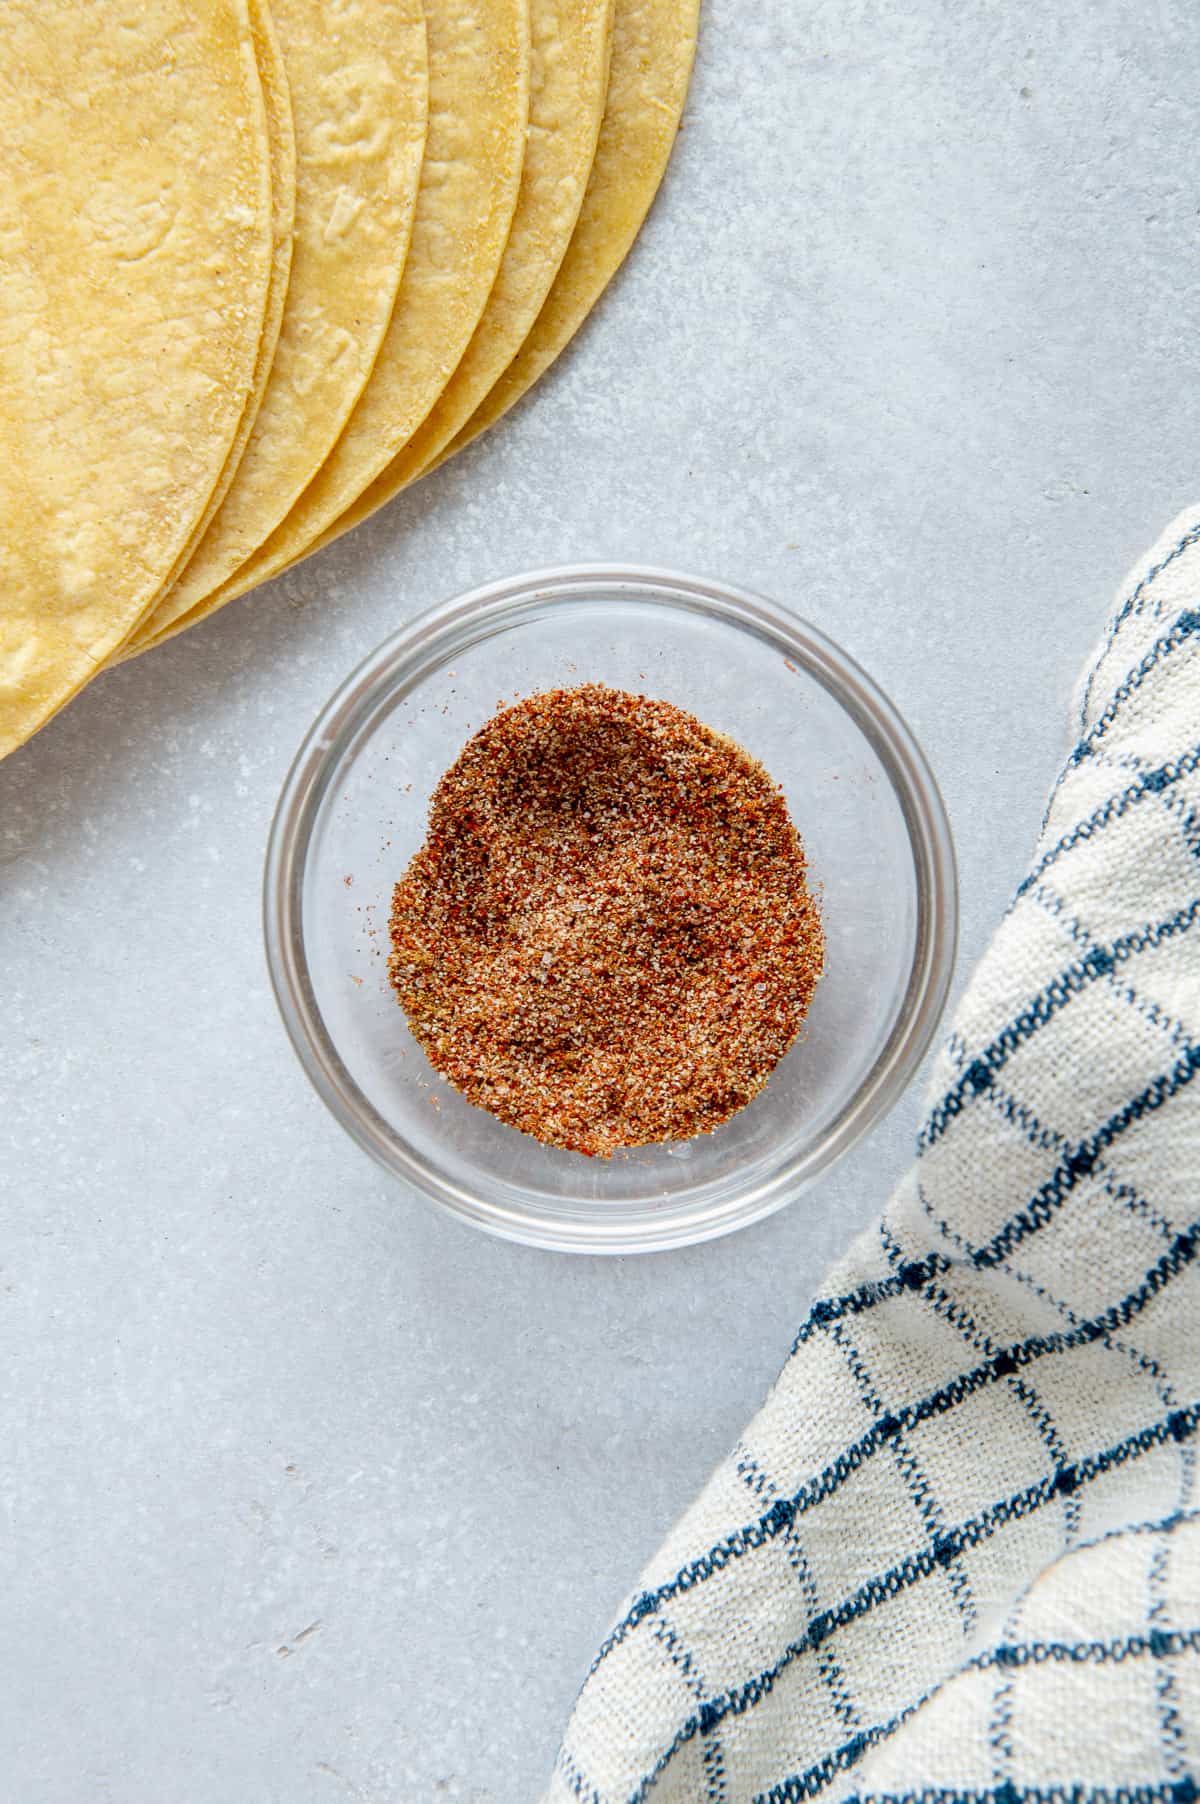 Homemade Mexican spice mix for sprinkling on tortilla chips.